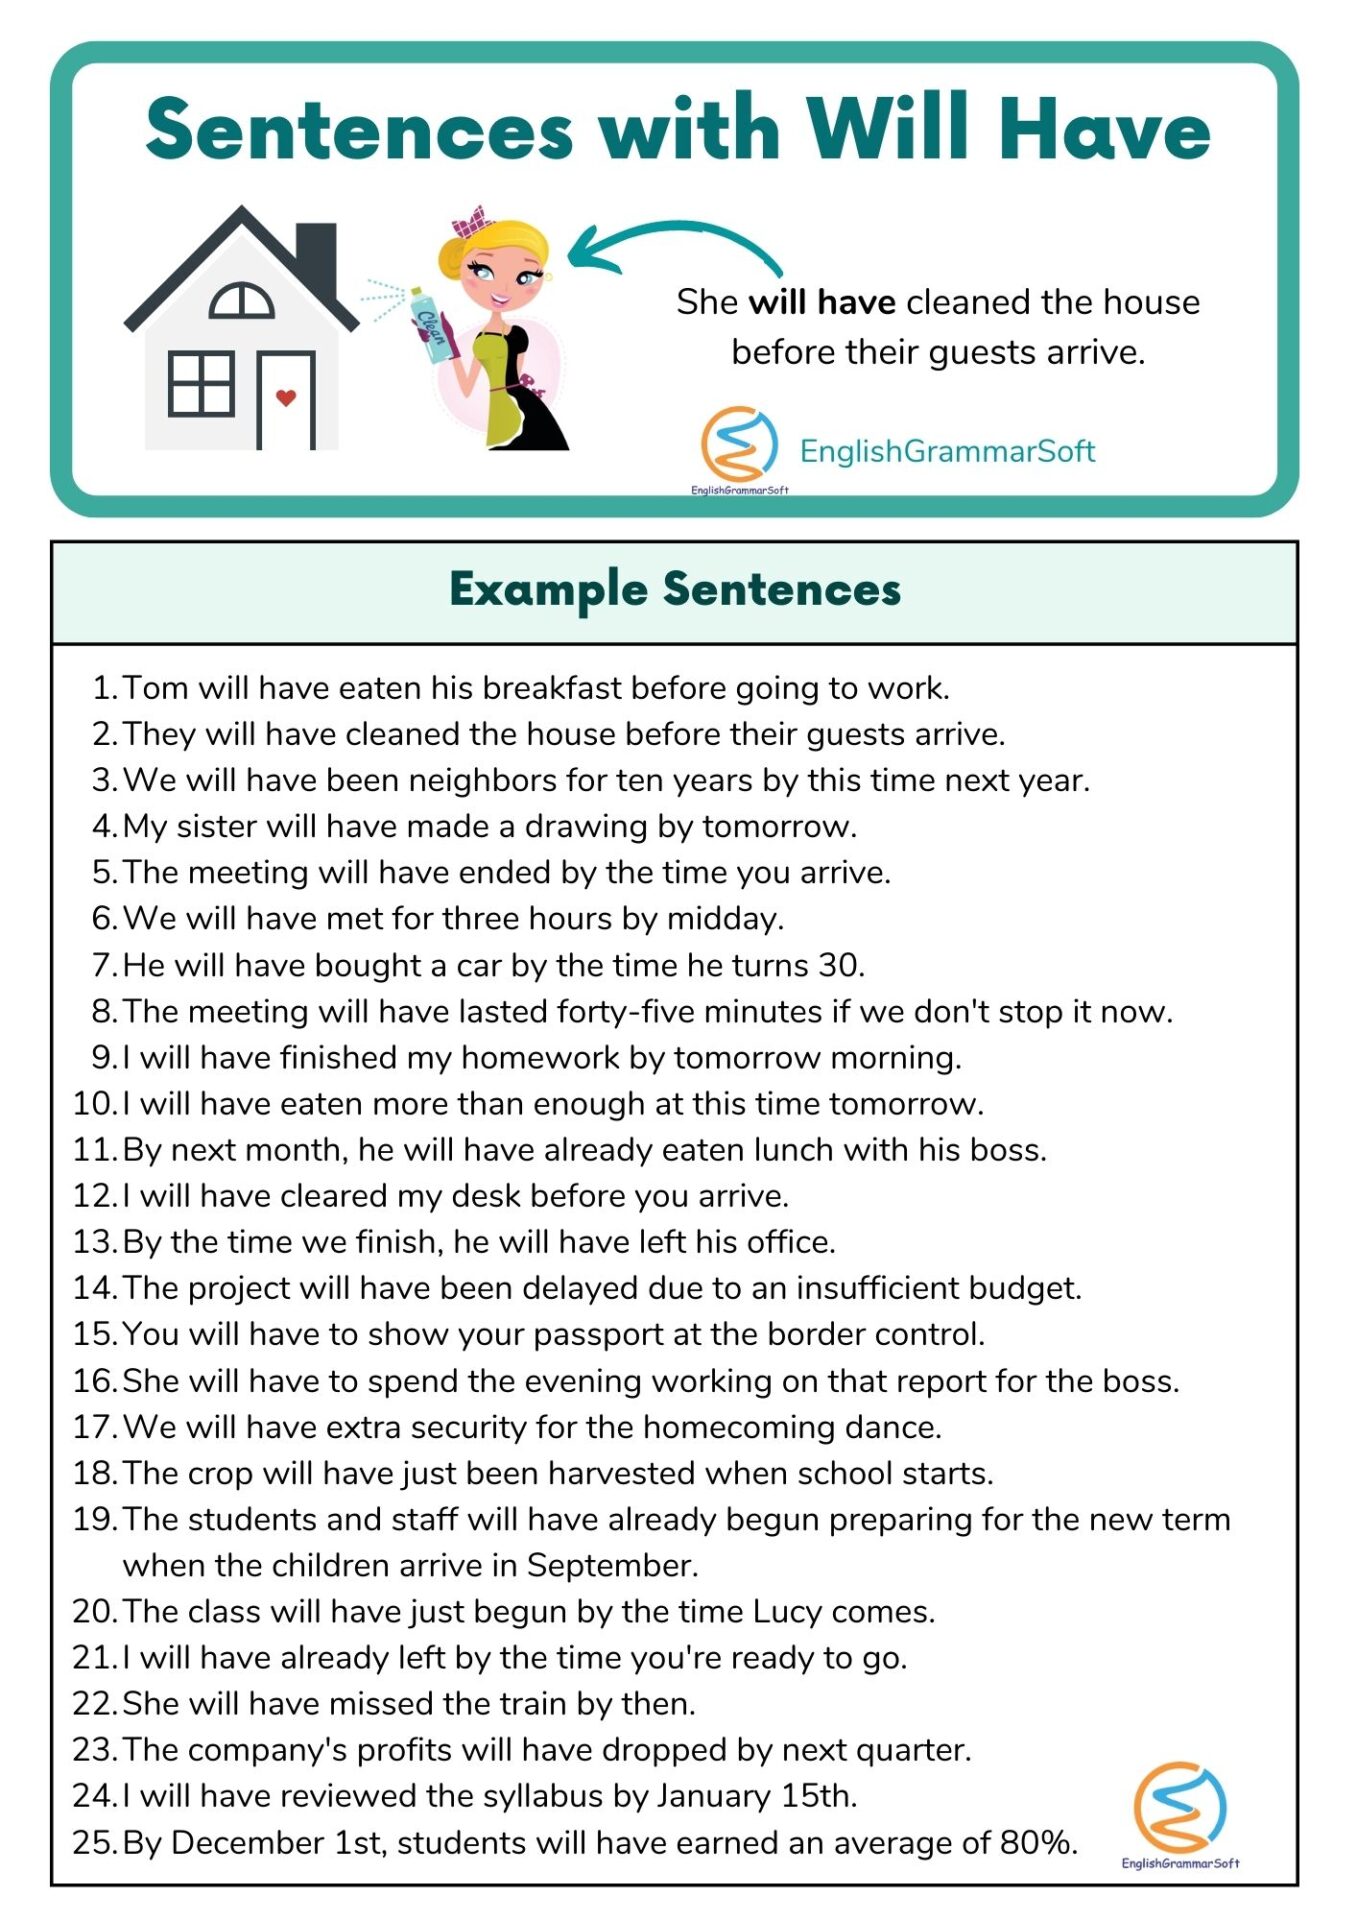 Sentences with Will Have